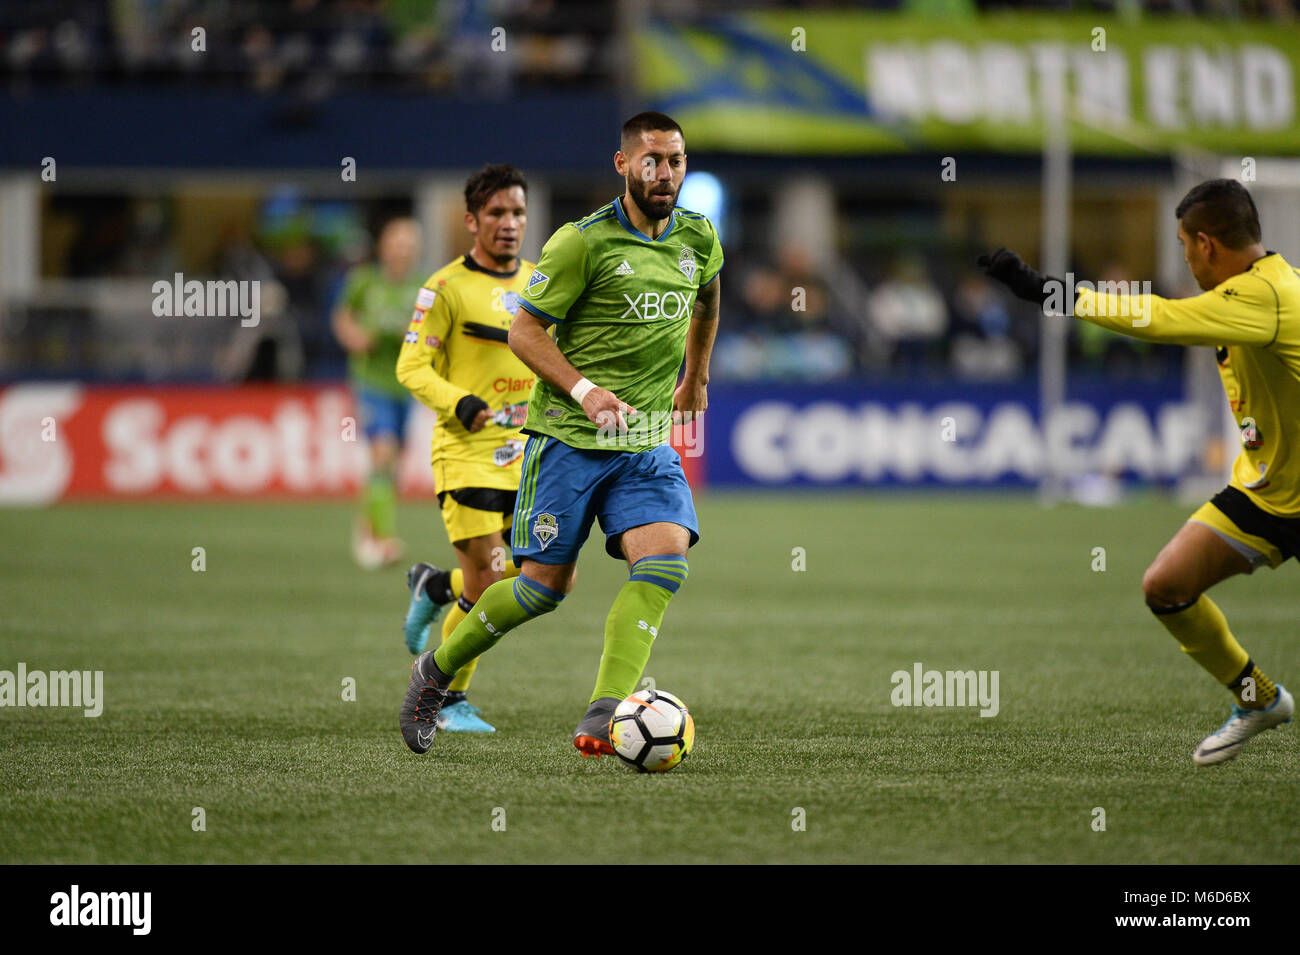 March 1, 2018 - Seattle, Washington, U.S - Soccer 2018: Seattle Sounder CLINT DEMPSEY (2) in action as Santa Tecla FC visits the Seattle Sounders for a CONCACAF match at Century Link Field in Seattle, WA. (Credit Image: © Jeff Halstead via ZUMA Wire) Stock Photo